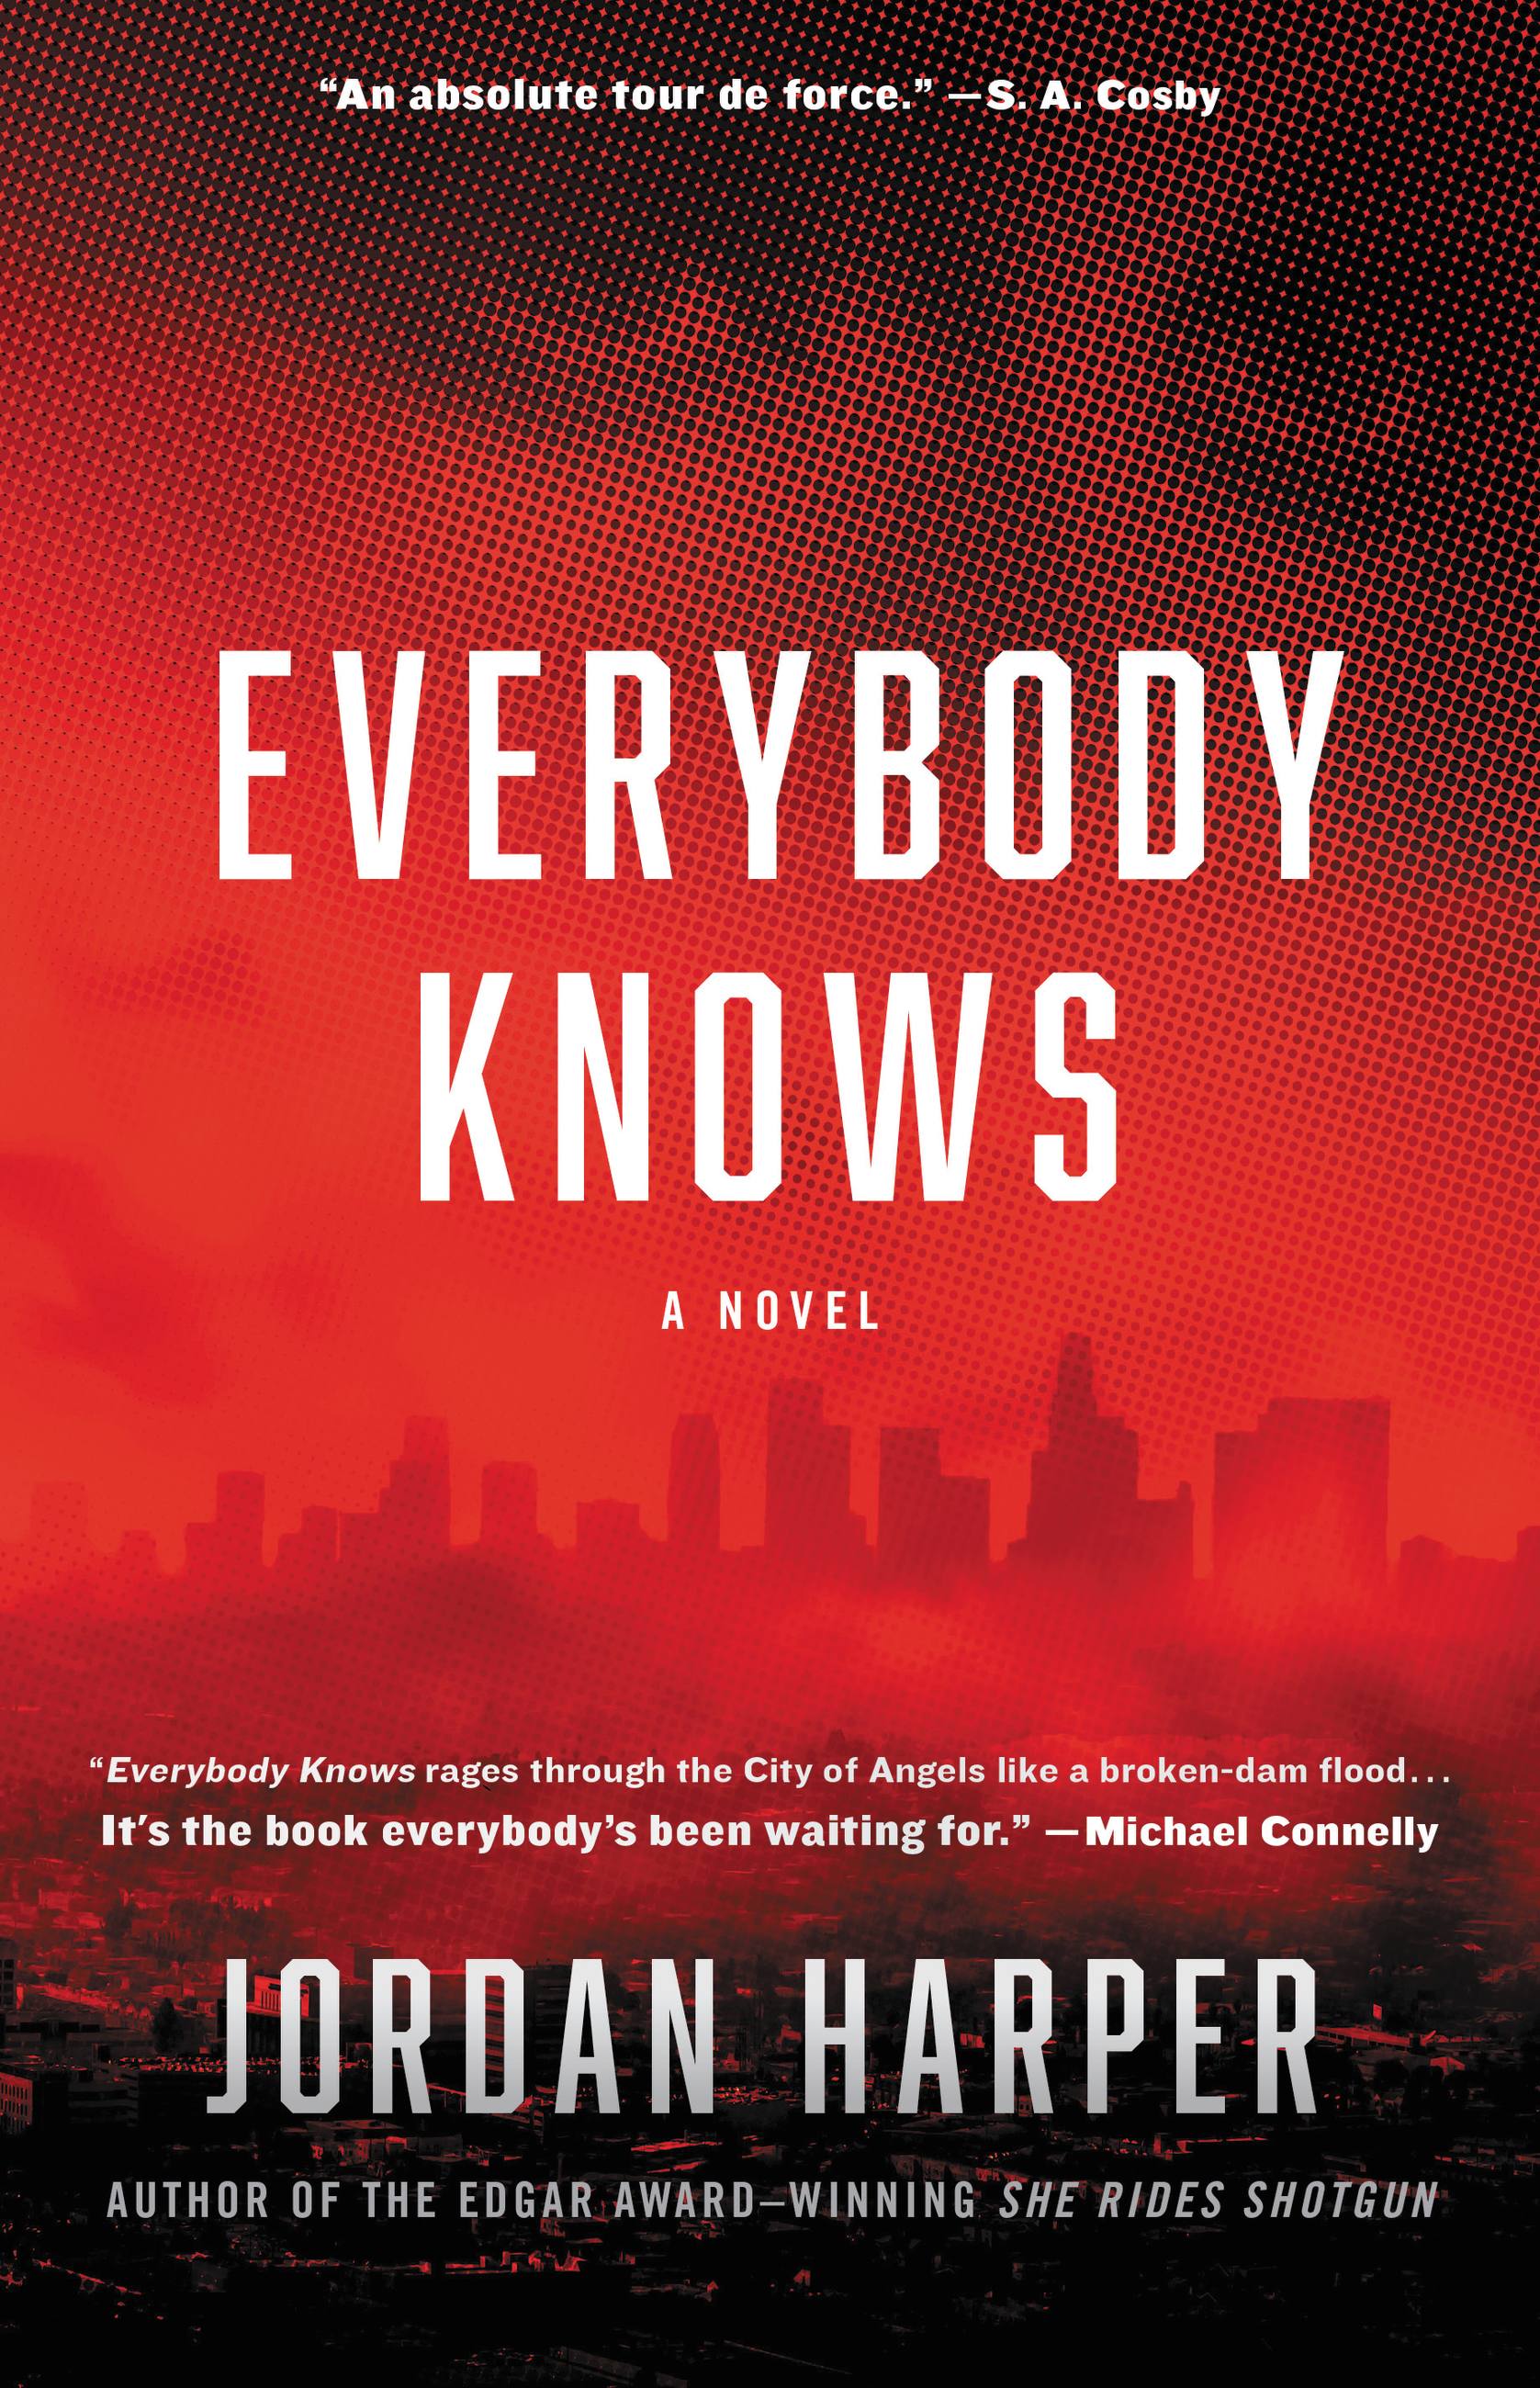 Everybody Knows by Jordan Harper Hachette Book Group pic